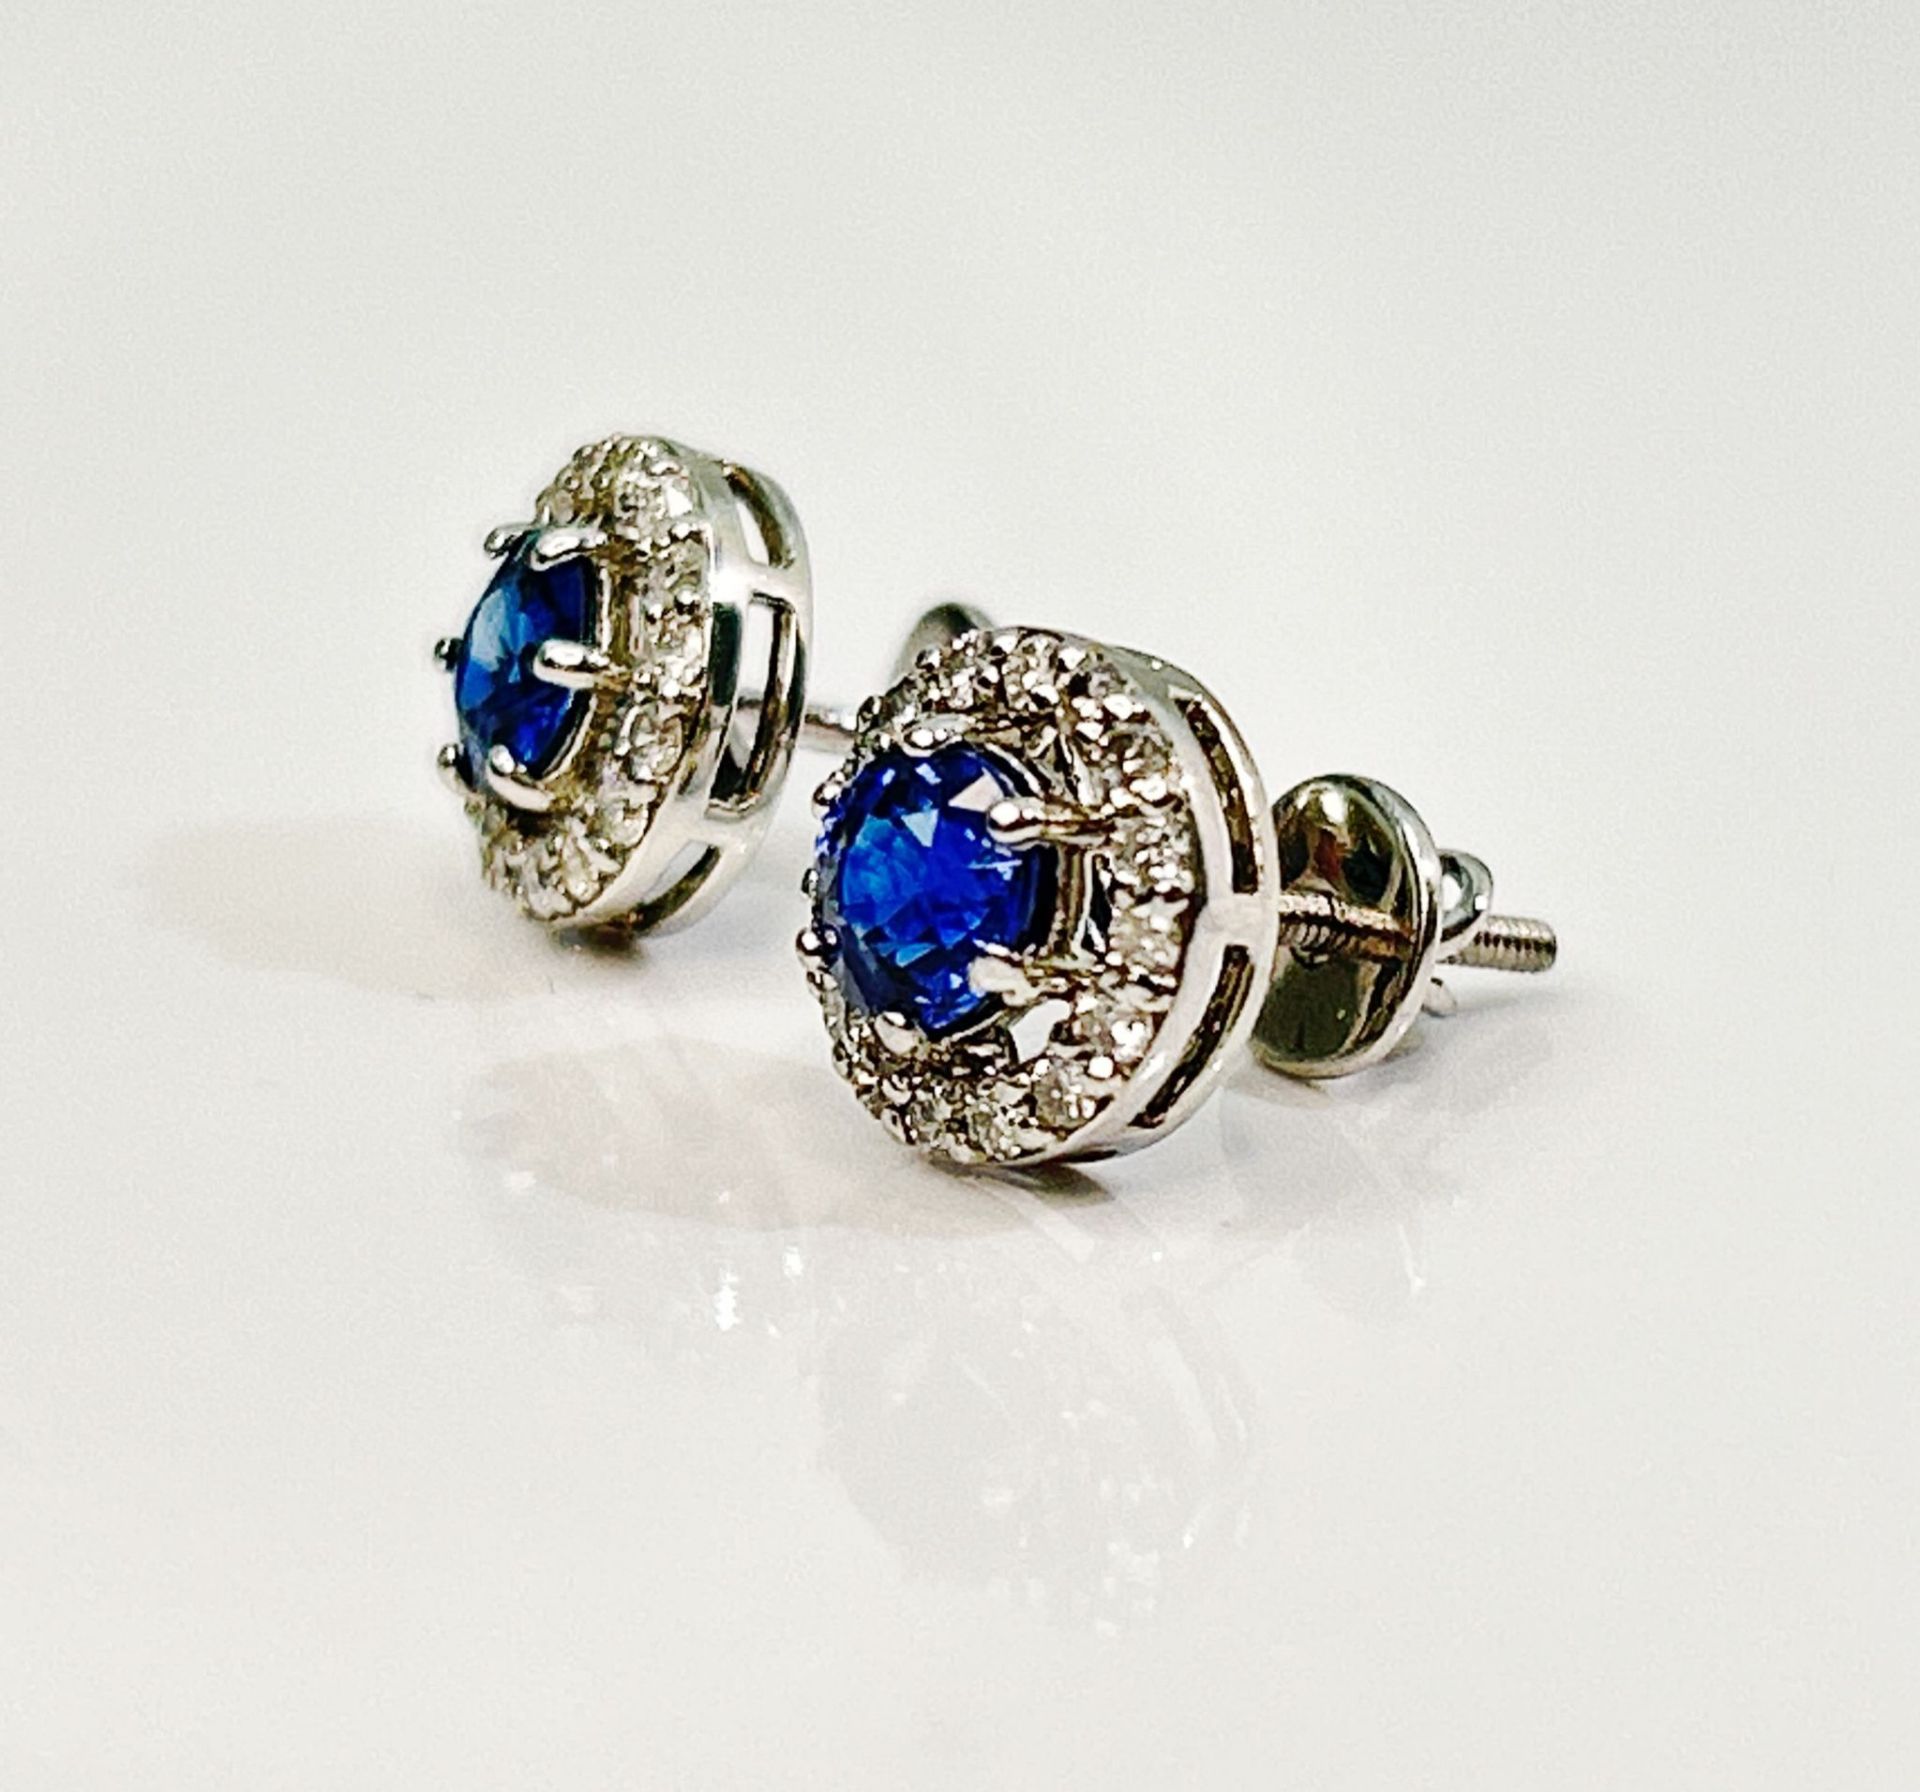 Beautiful Natural Unheated Blue Sapphire Earrings With Diamonds & Platinum - Image 5 of 6